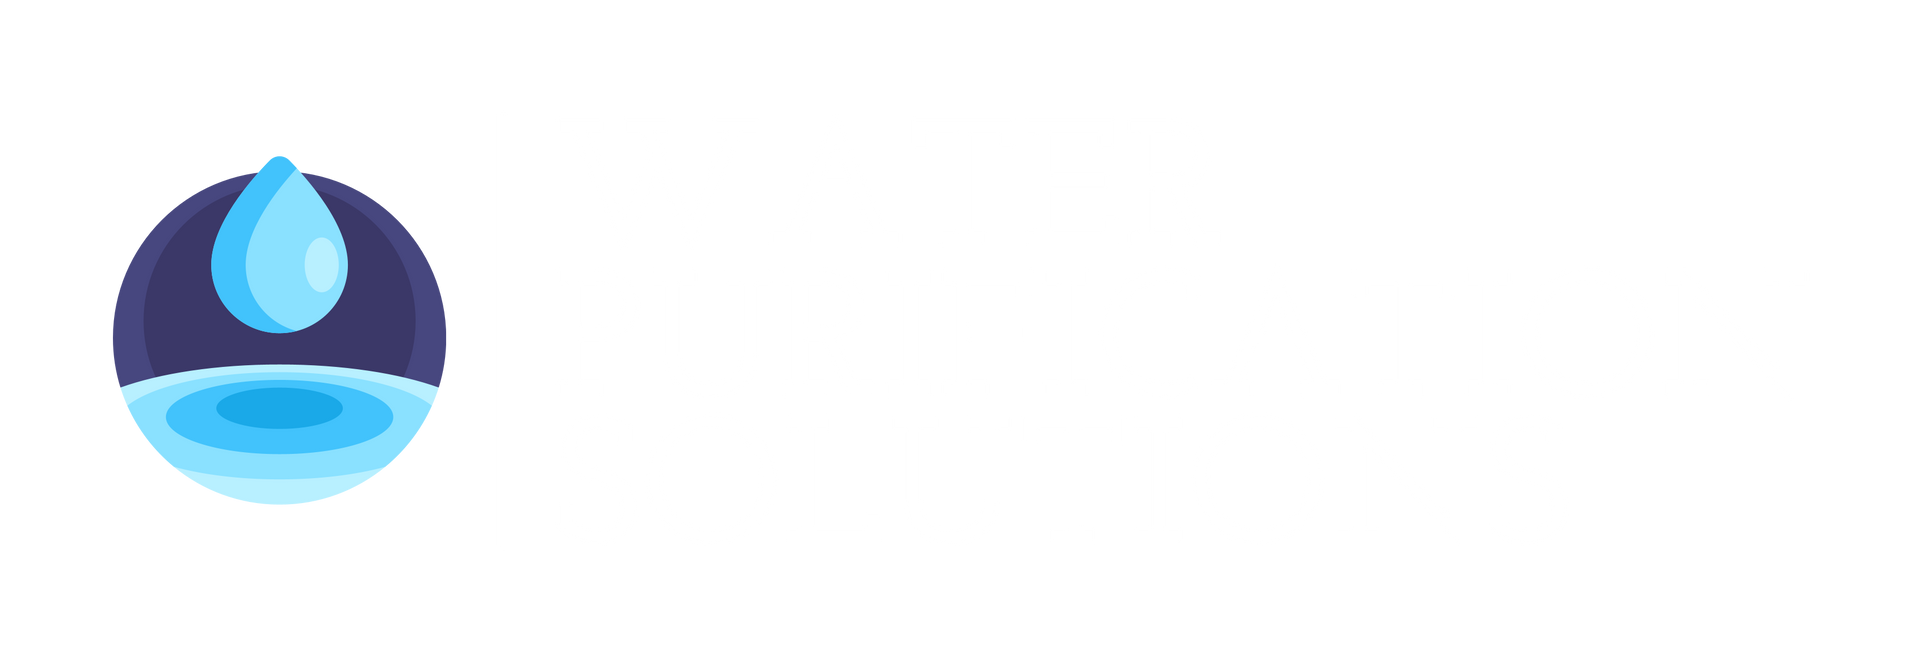 Water Purification Solutions